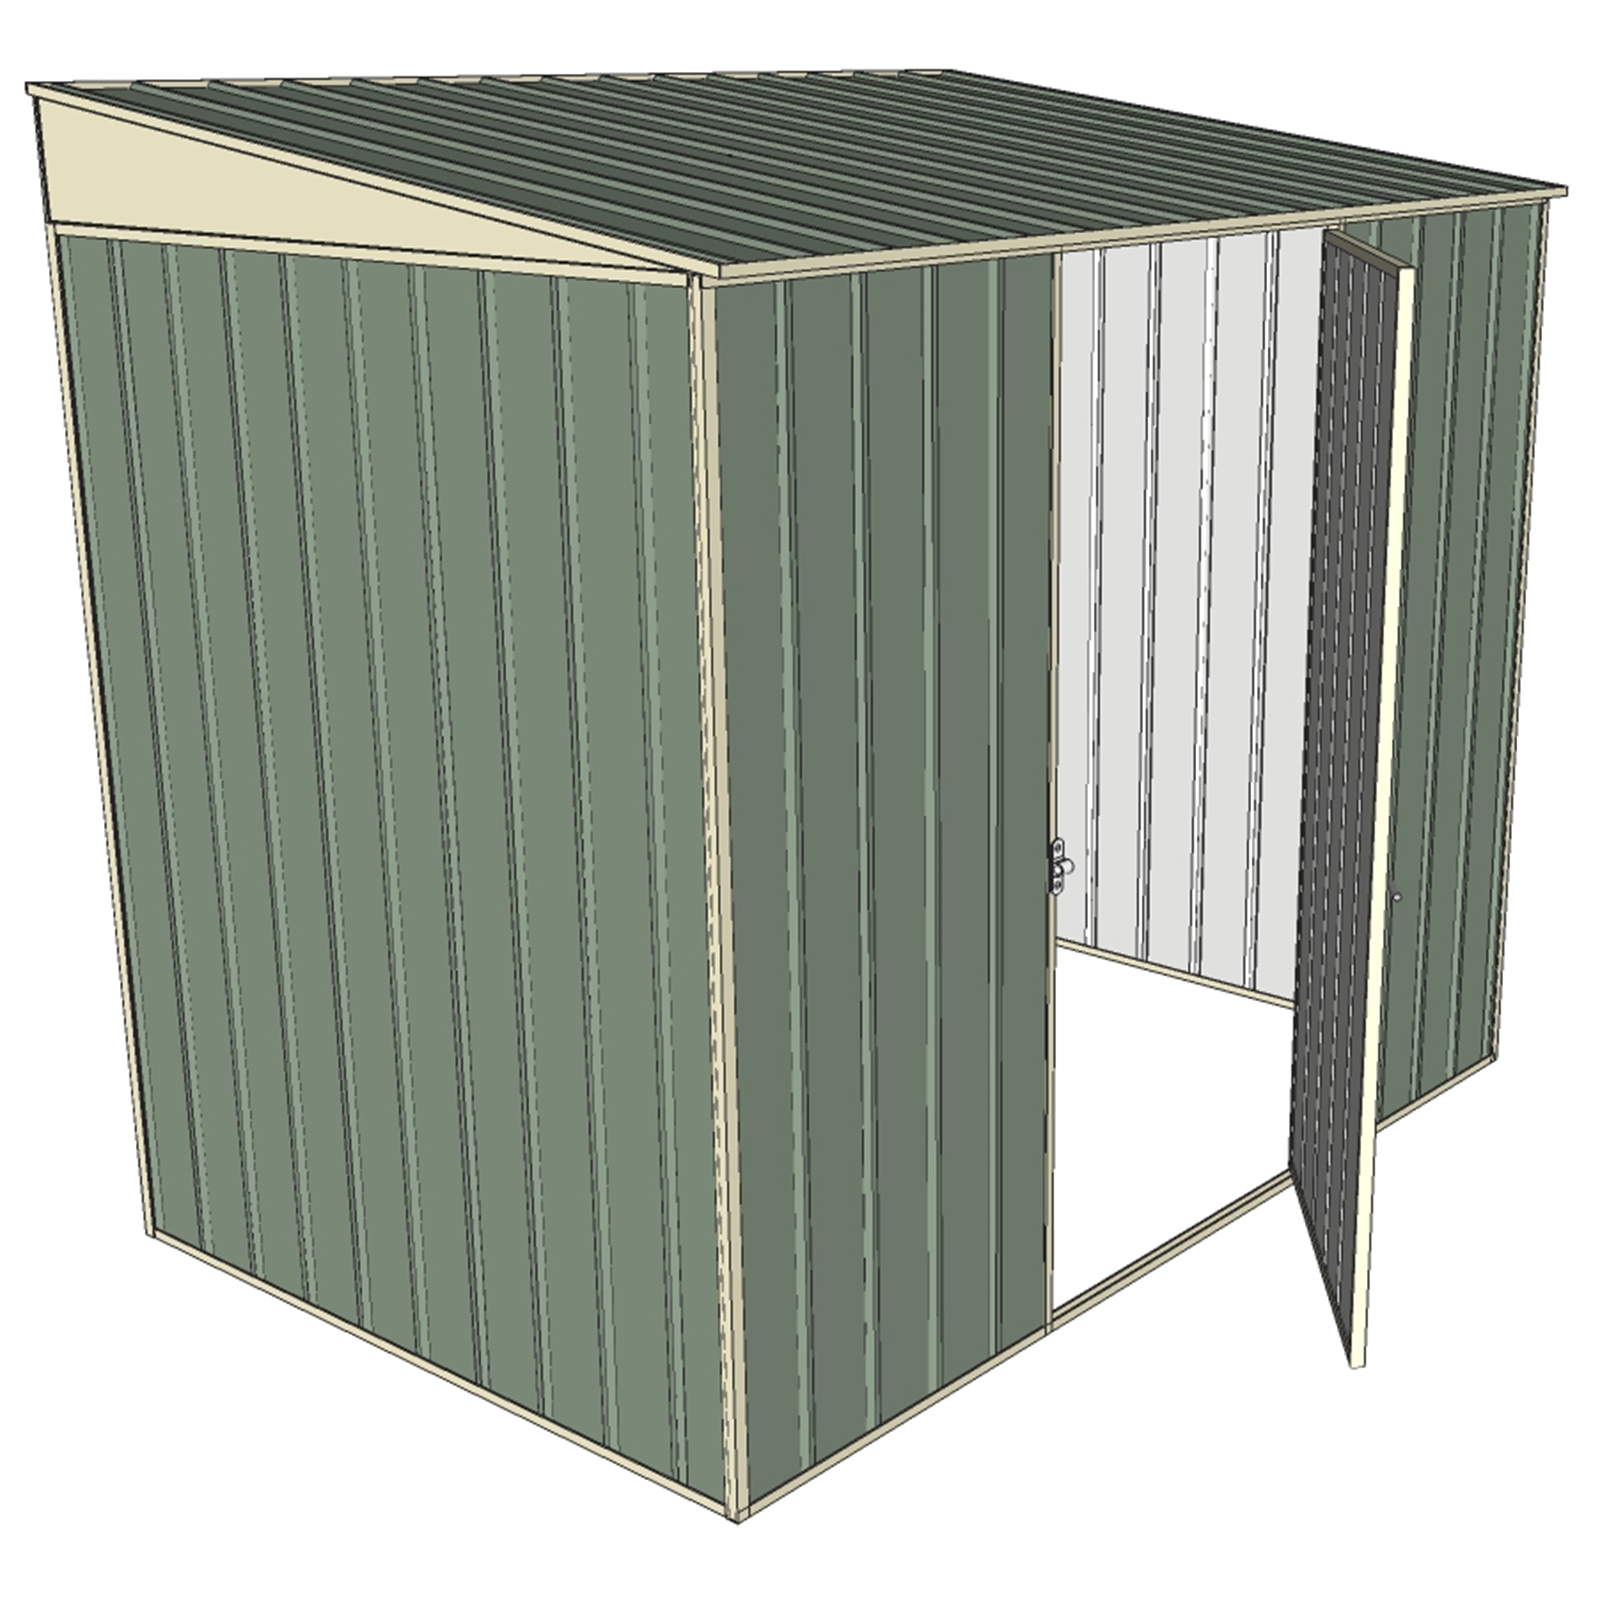 Build-a-Shed 2.3 x 2.0 x 1.5m Green Skillion Single Hinged Door Narrow Shed